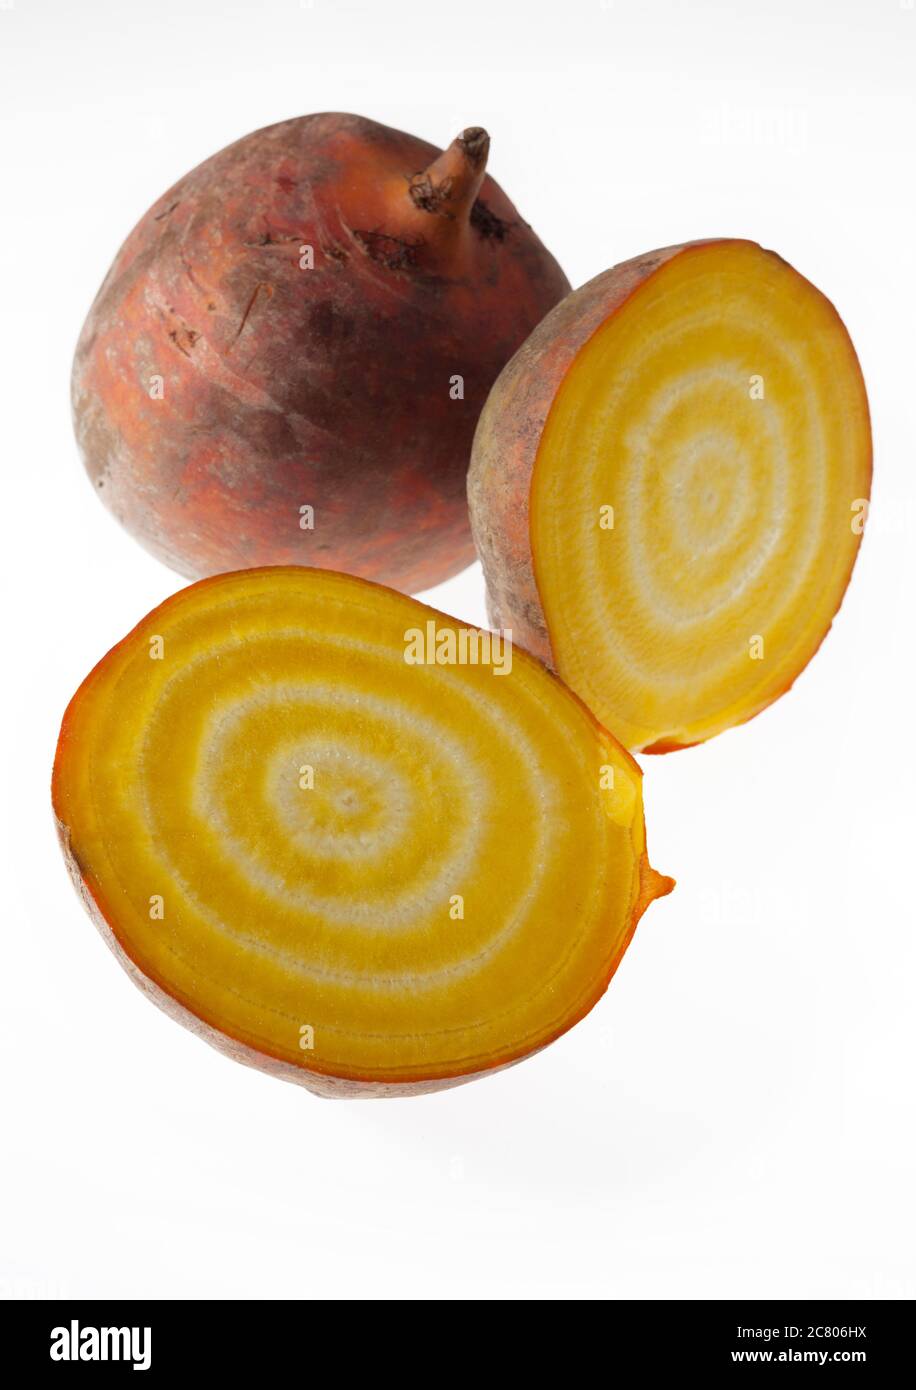 A freshly cut open Golden yellow striped beetroot on a white light box background Stock Photo